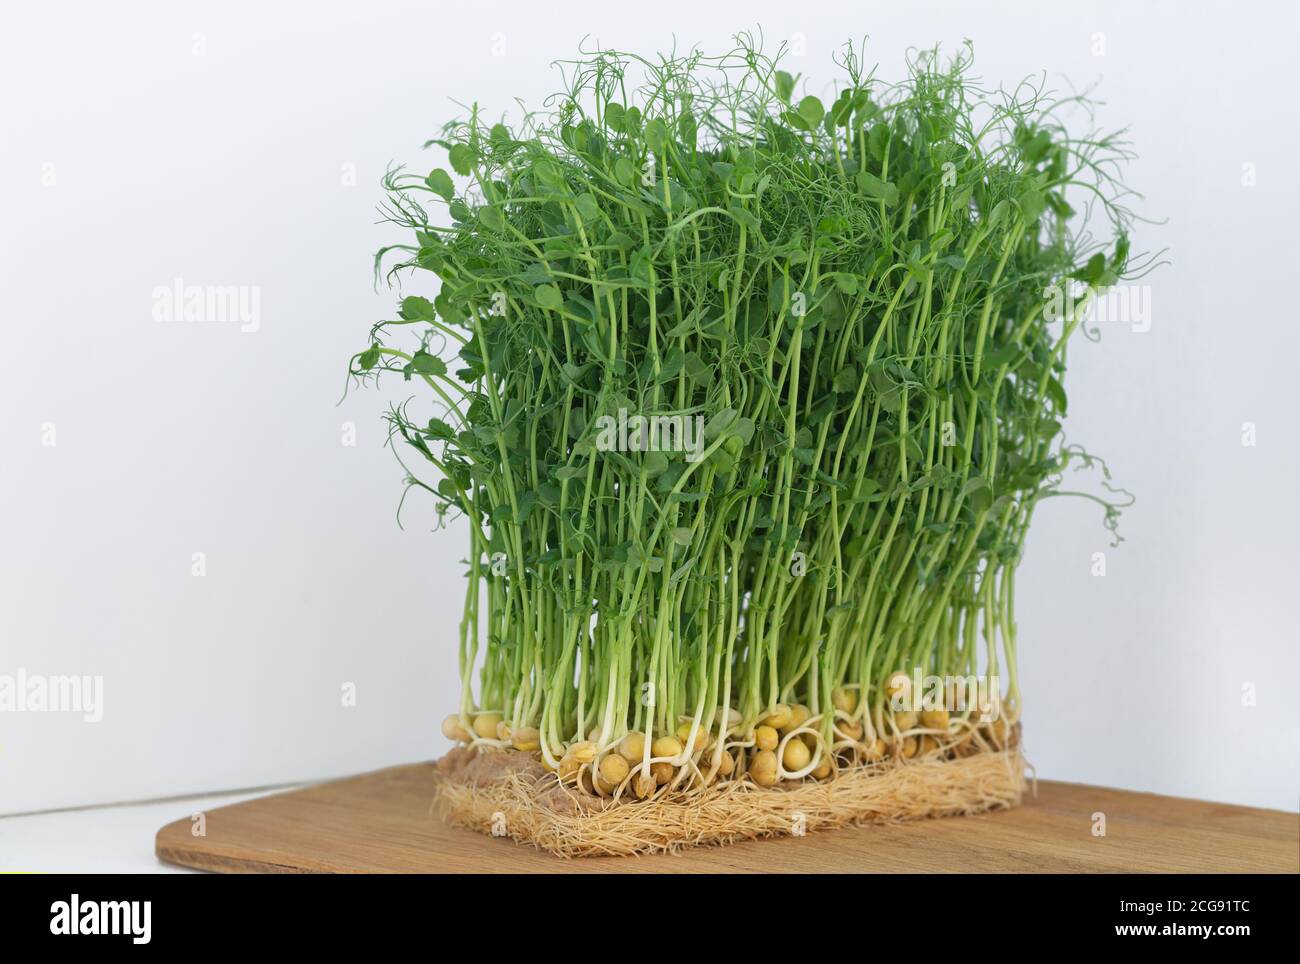 Peas microgreens with seeds and roots are growing on table Stock Photo